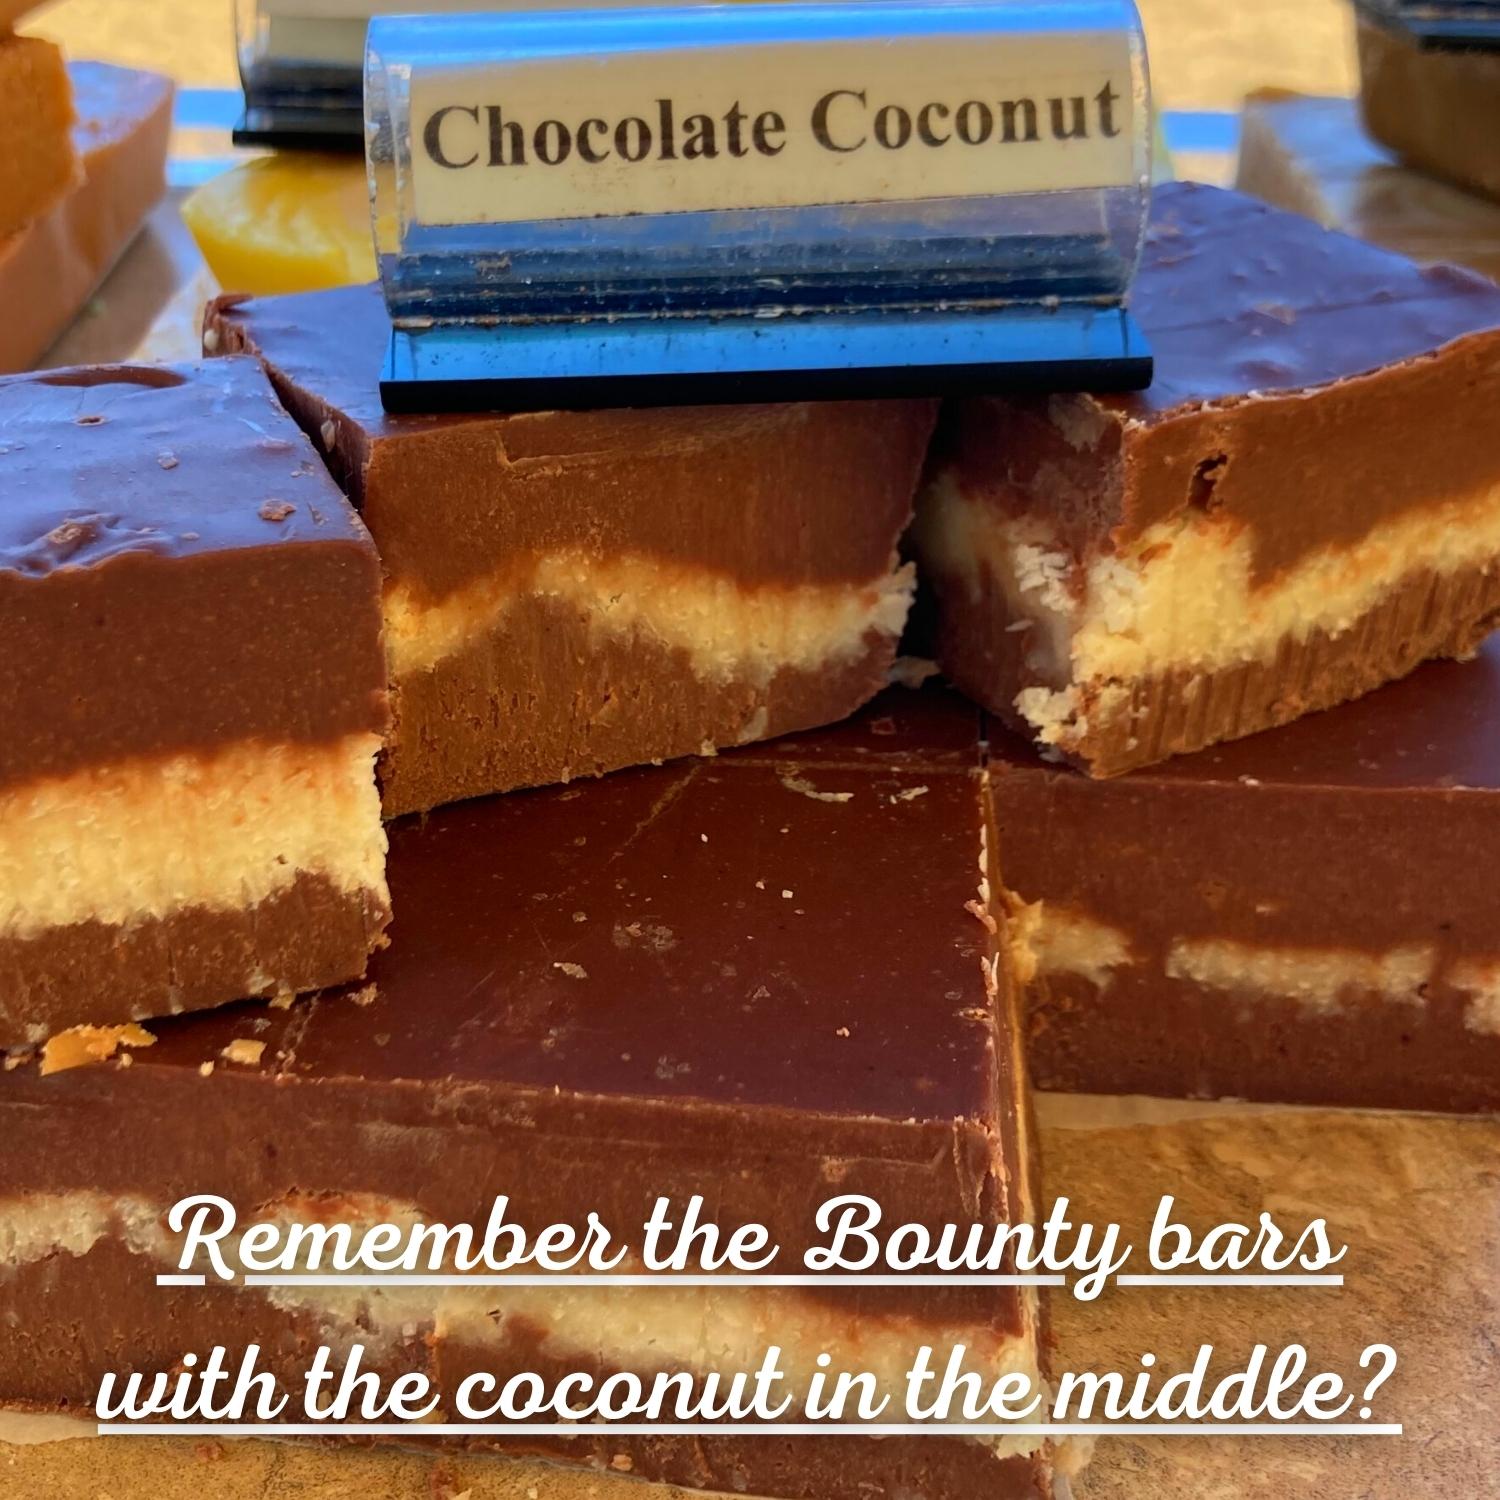 Chocolate Coconut Fudge Remember the Bounty bars with the coconut in the middle